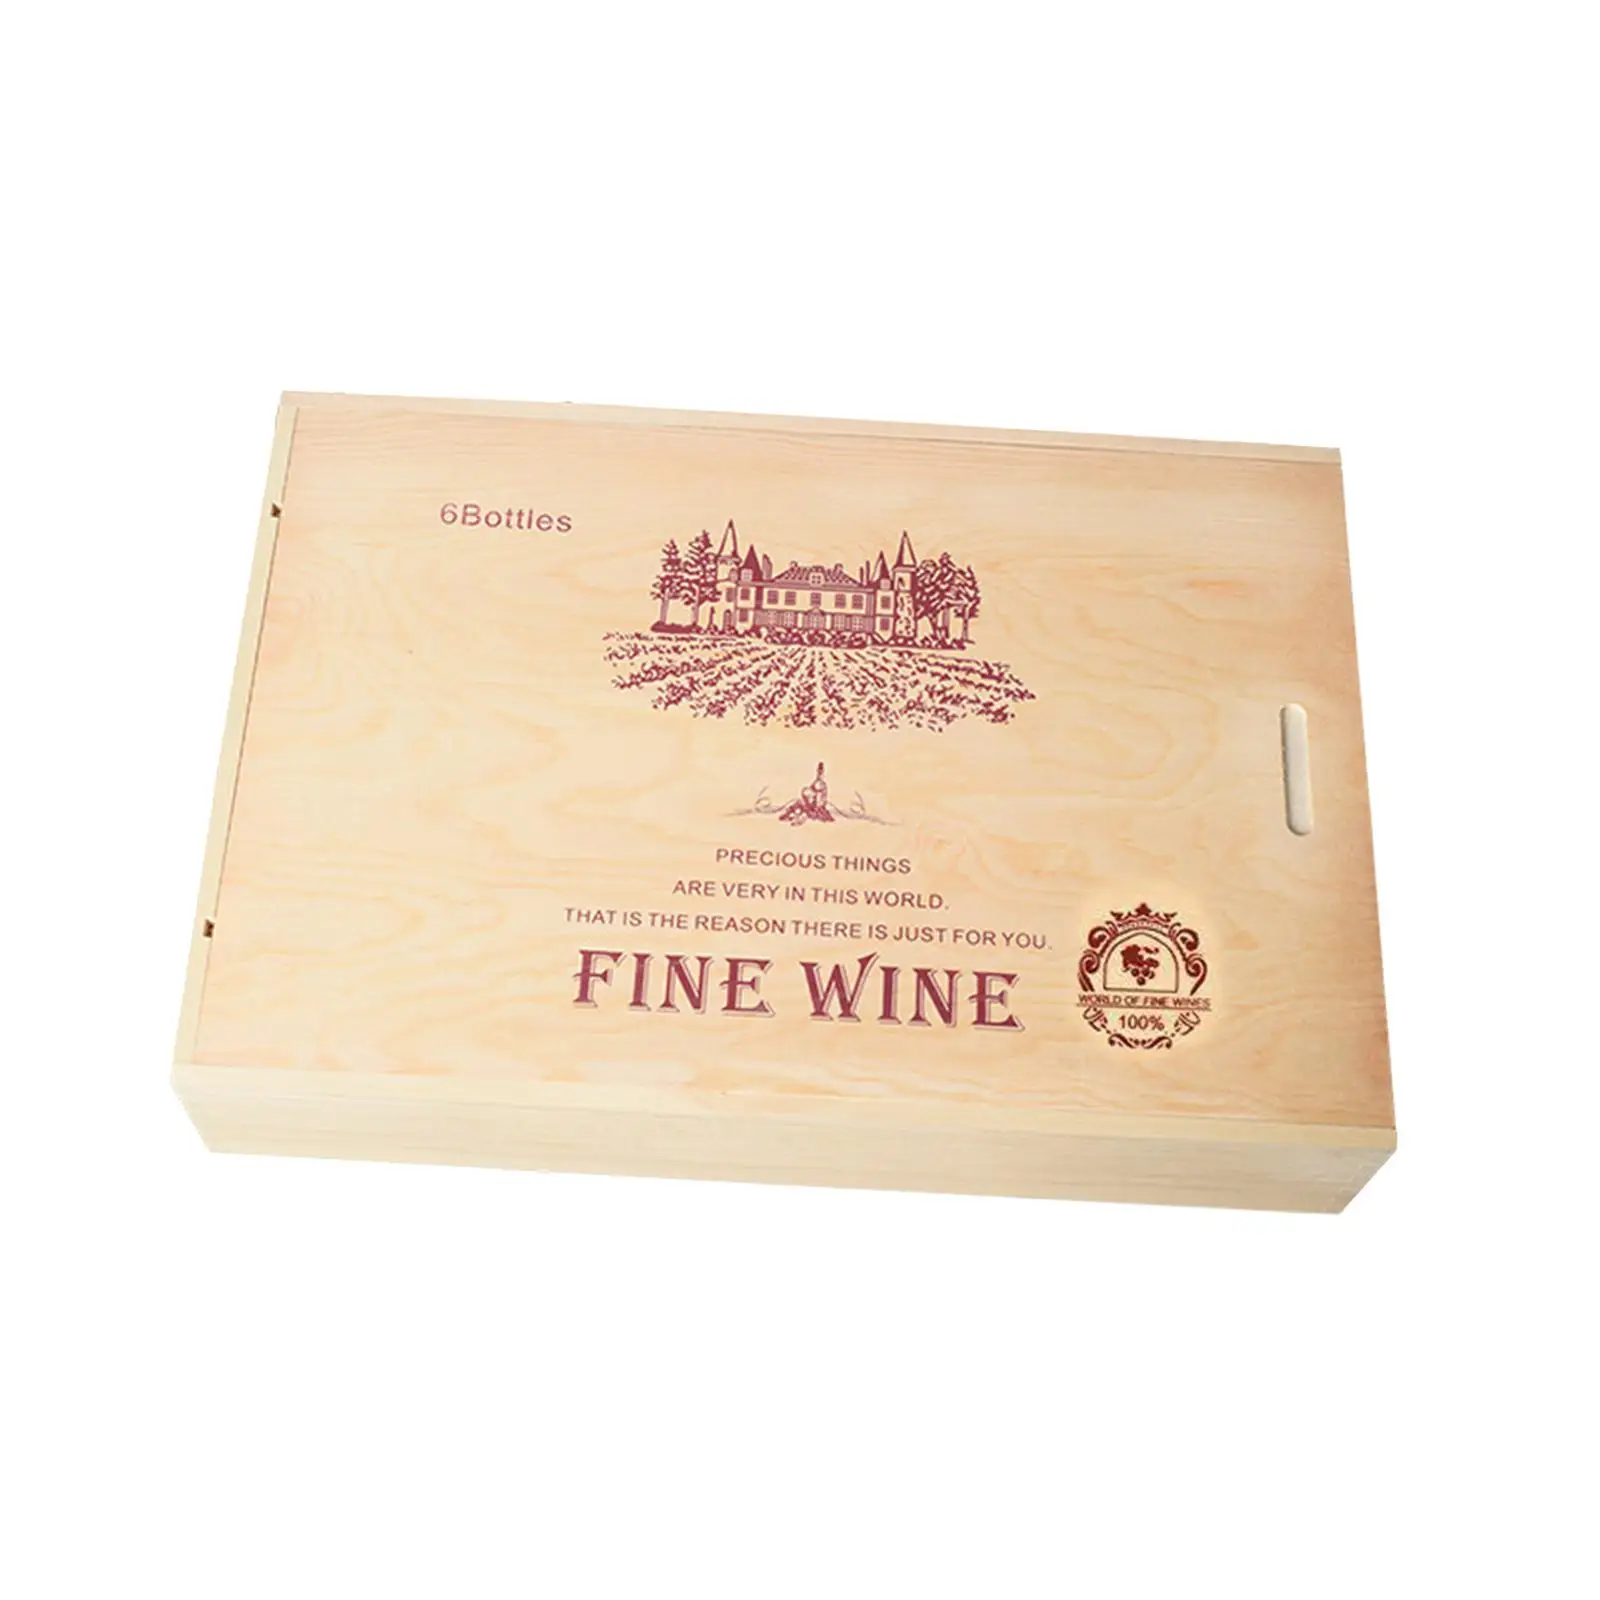 Wine Bottle Holder Gift Box Decorative Wine Carrier Wood Storage Gift Box for Celebrations Birthday Holiday Anniversary Party